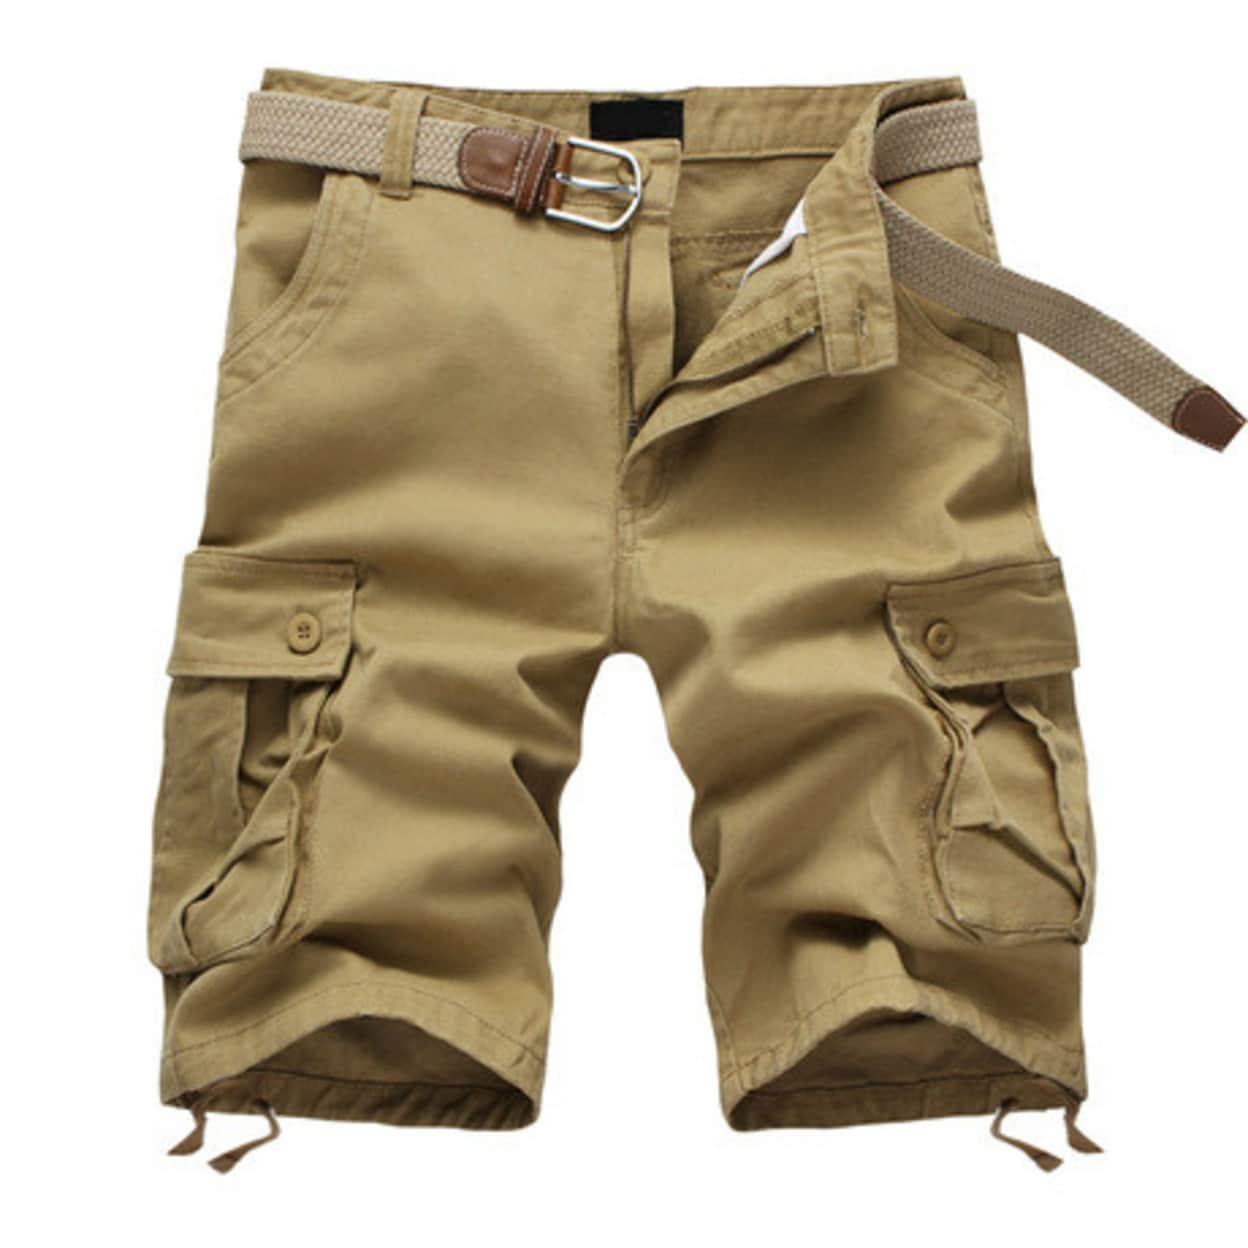 Mens Casual Shorts Pocket Beach Work Casual Short Comfy Fashion Sport Loose Active Trouser